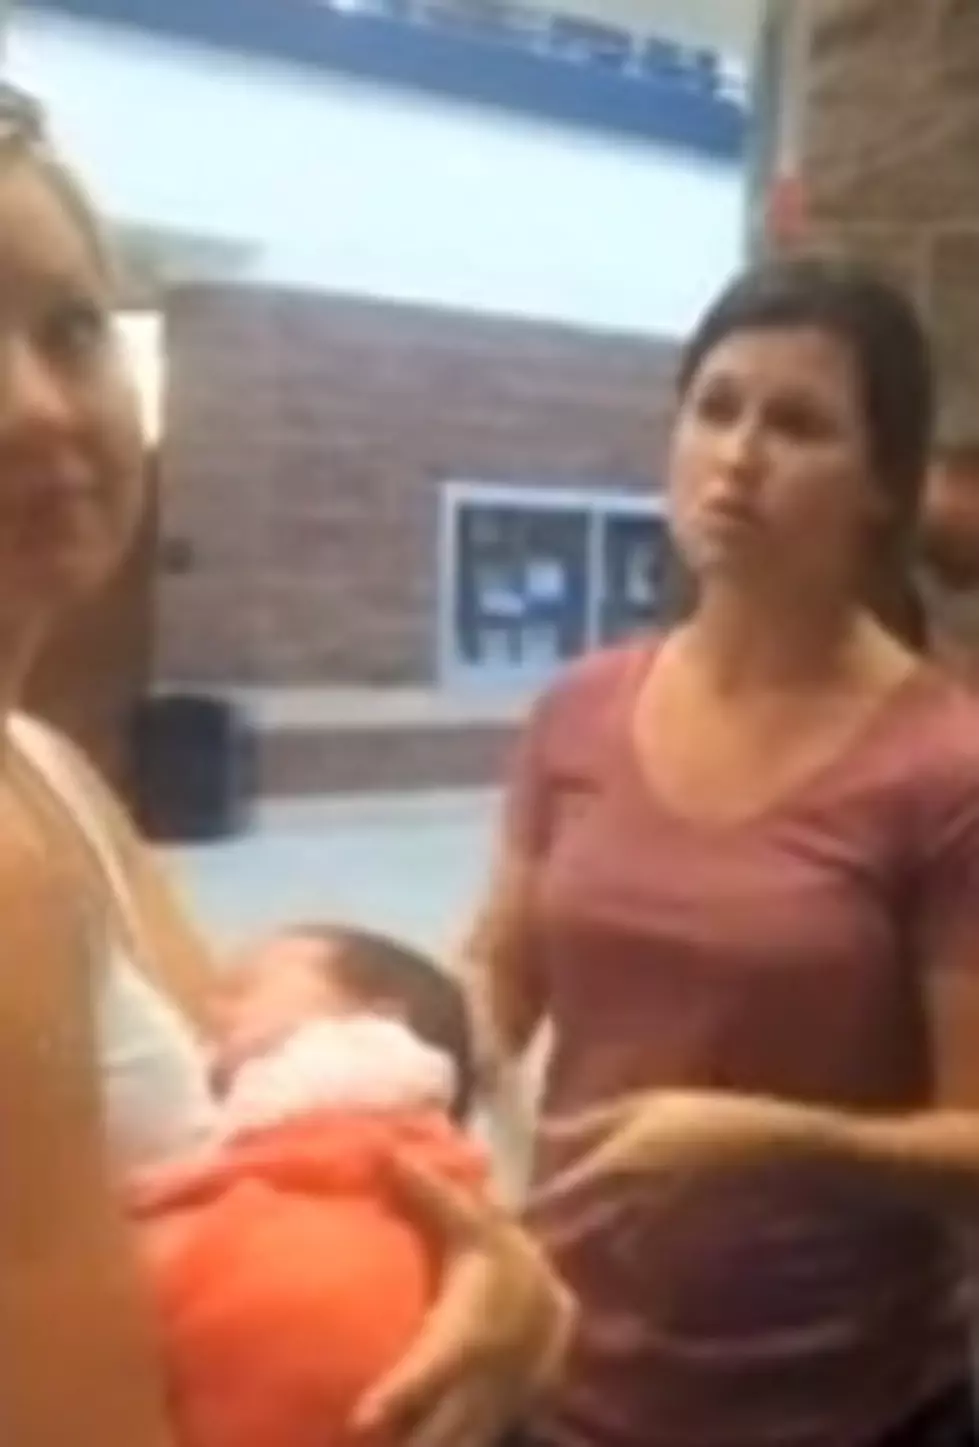 Breastfeeding Mom Puts Woman Who Asked Her To ‘Cover Up’ In Her Place [VIDEO]